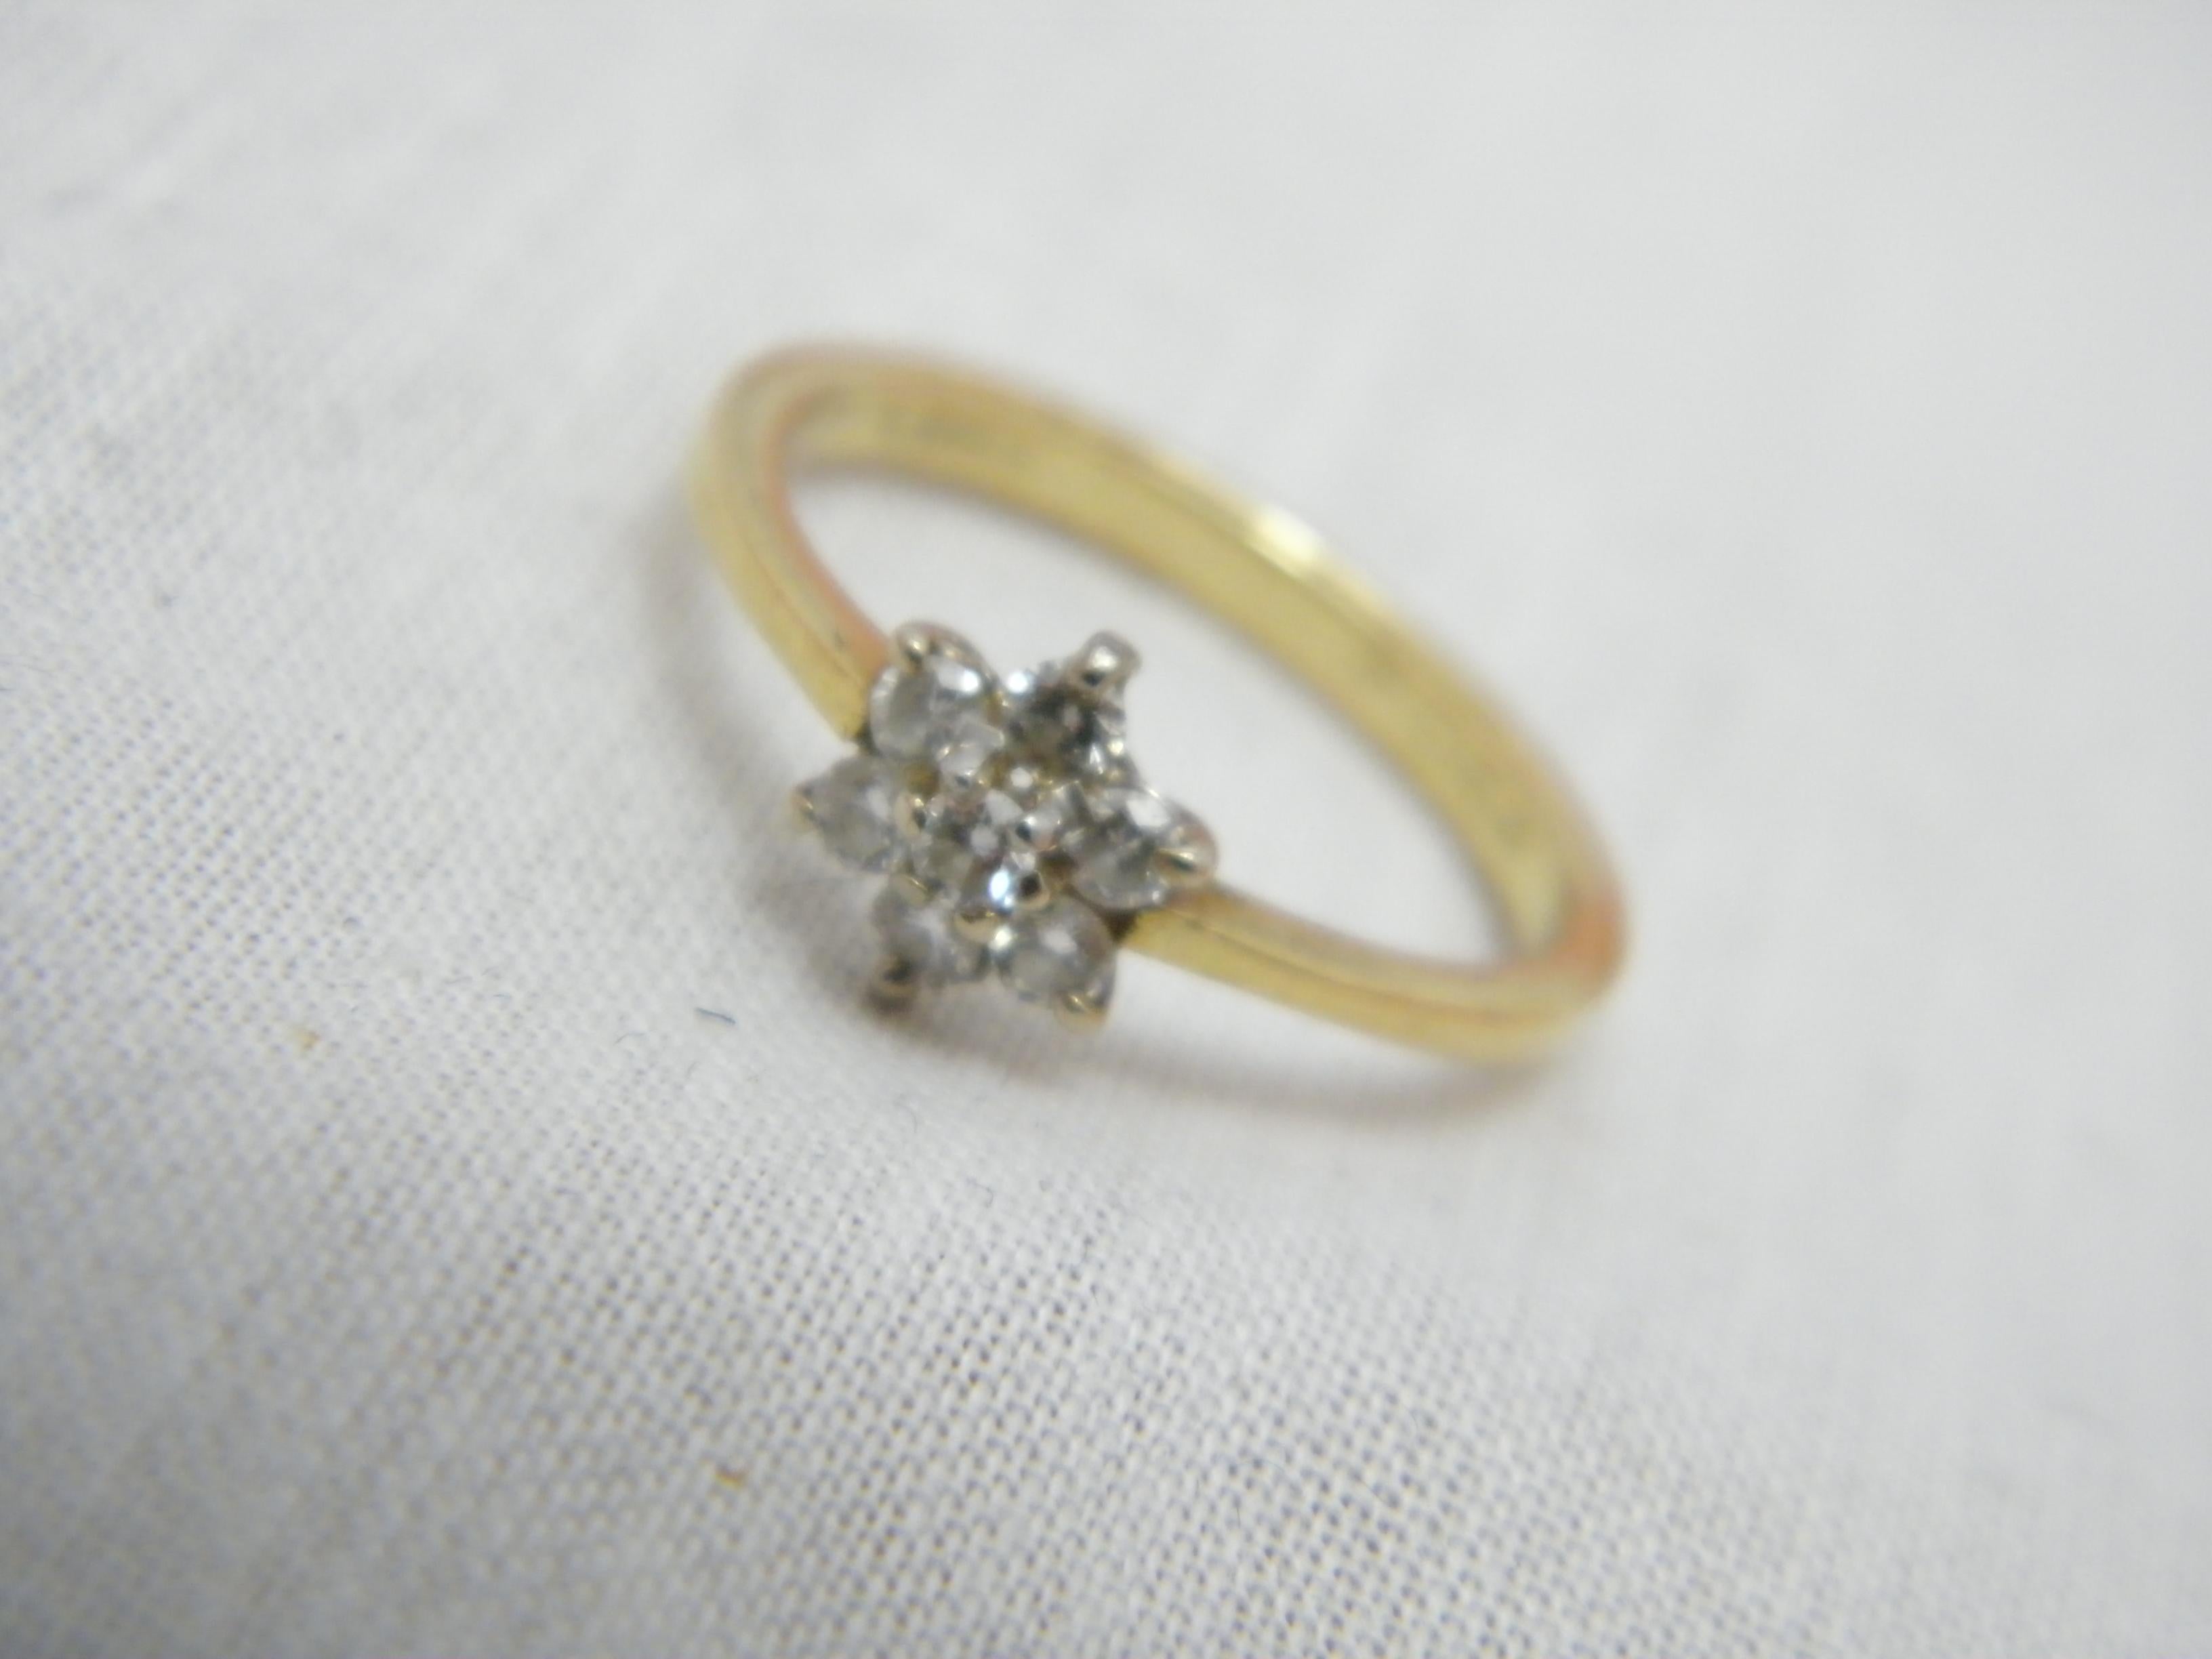 If you have landed on this page then you have an eye for beauty.

On offer is this gorgeous
18CT GOLD DIAMOND CLUSTER ENGAGEMENT RING

DETAILS
Material: 18ct 750/000 Yellow Gold
This ring has a sturdy shank hence ideal if resizing needed
Style: